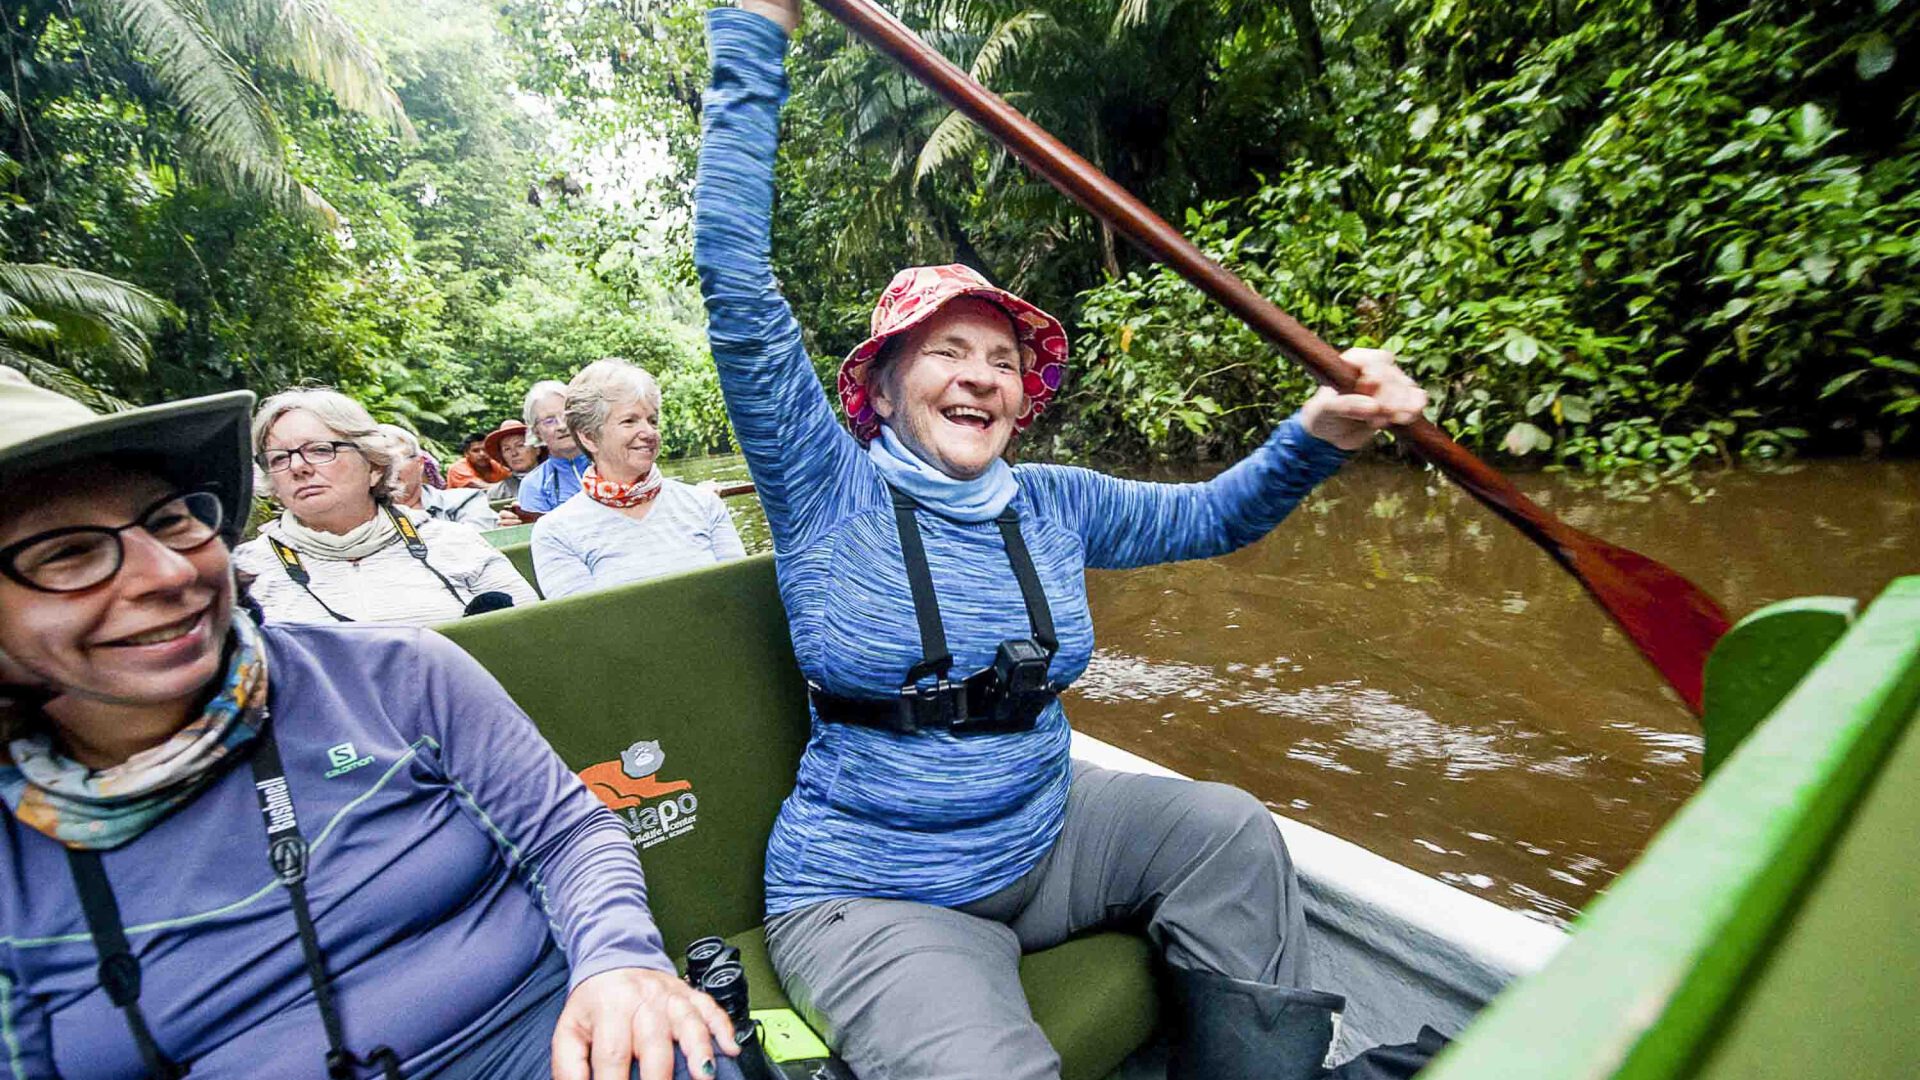 Women paddle down a river in a boat. One of them is laughing.